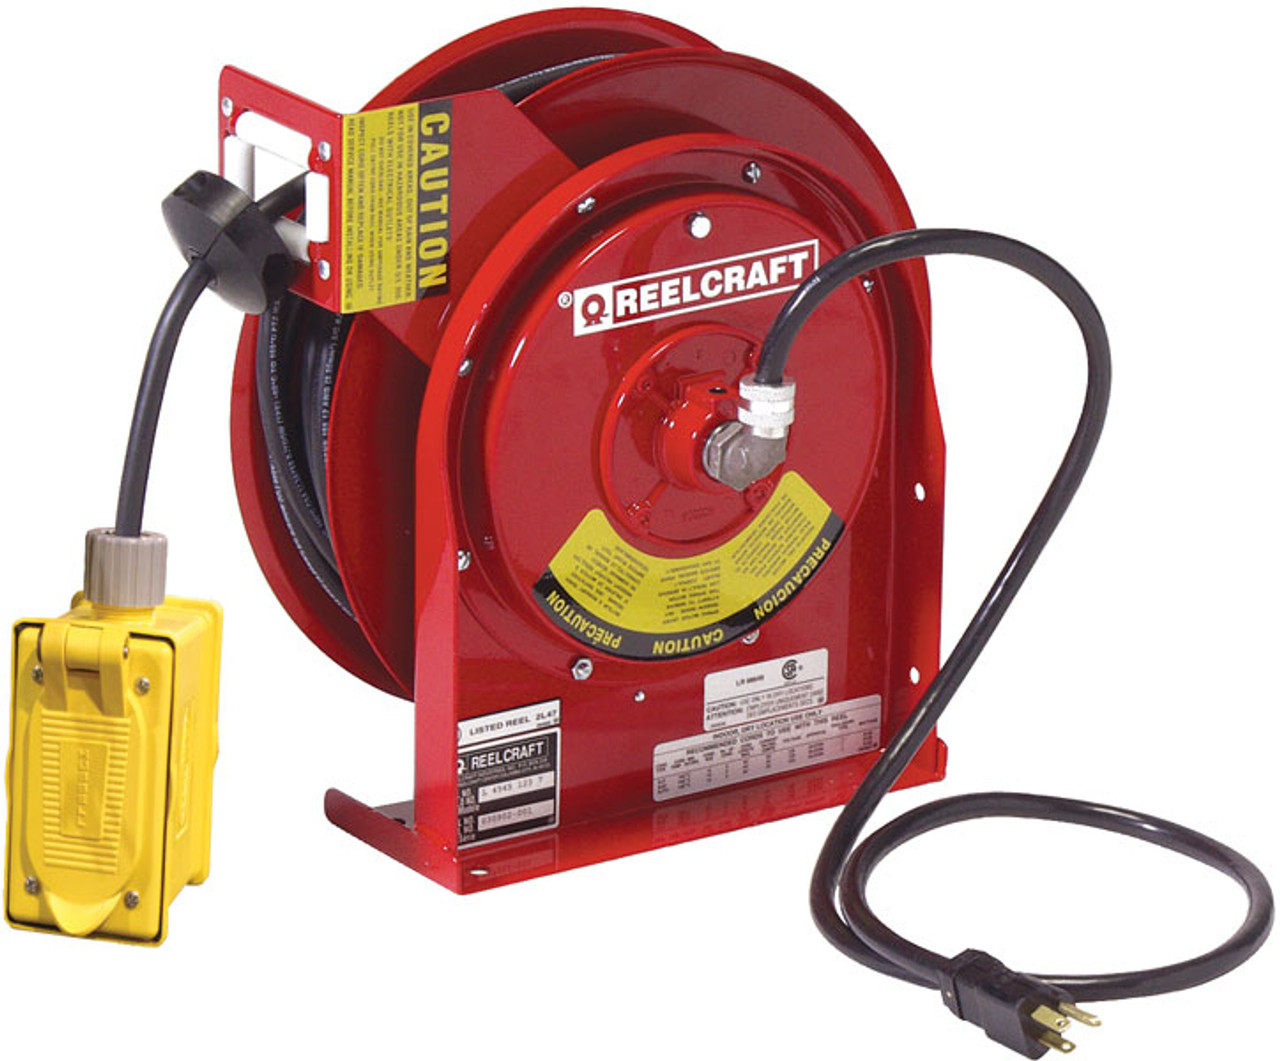 Reelcraft Series L5000 Power Cord Reels w/ Receptacles - Duplex Outlet Box  - 12 AWG - 50